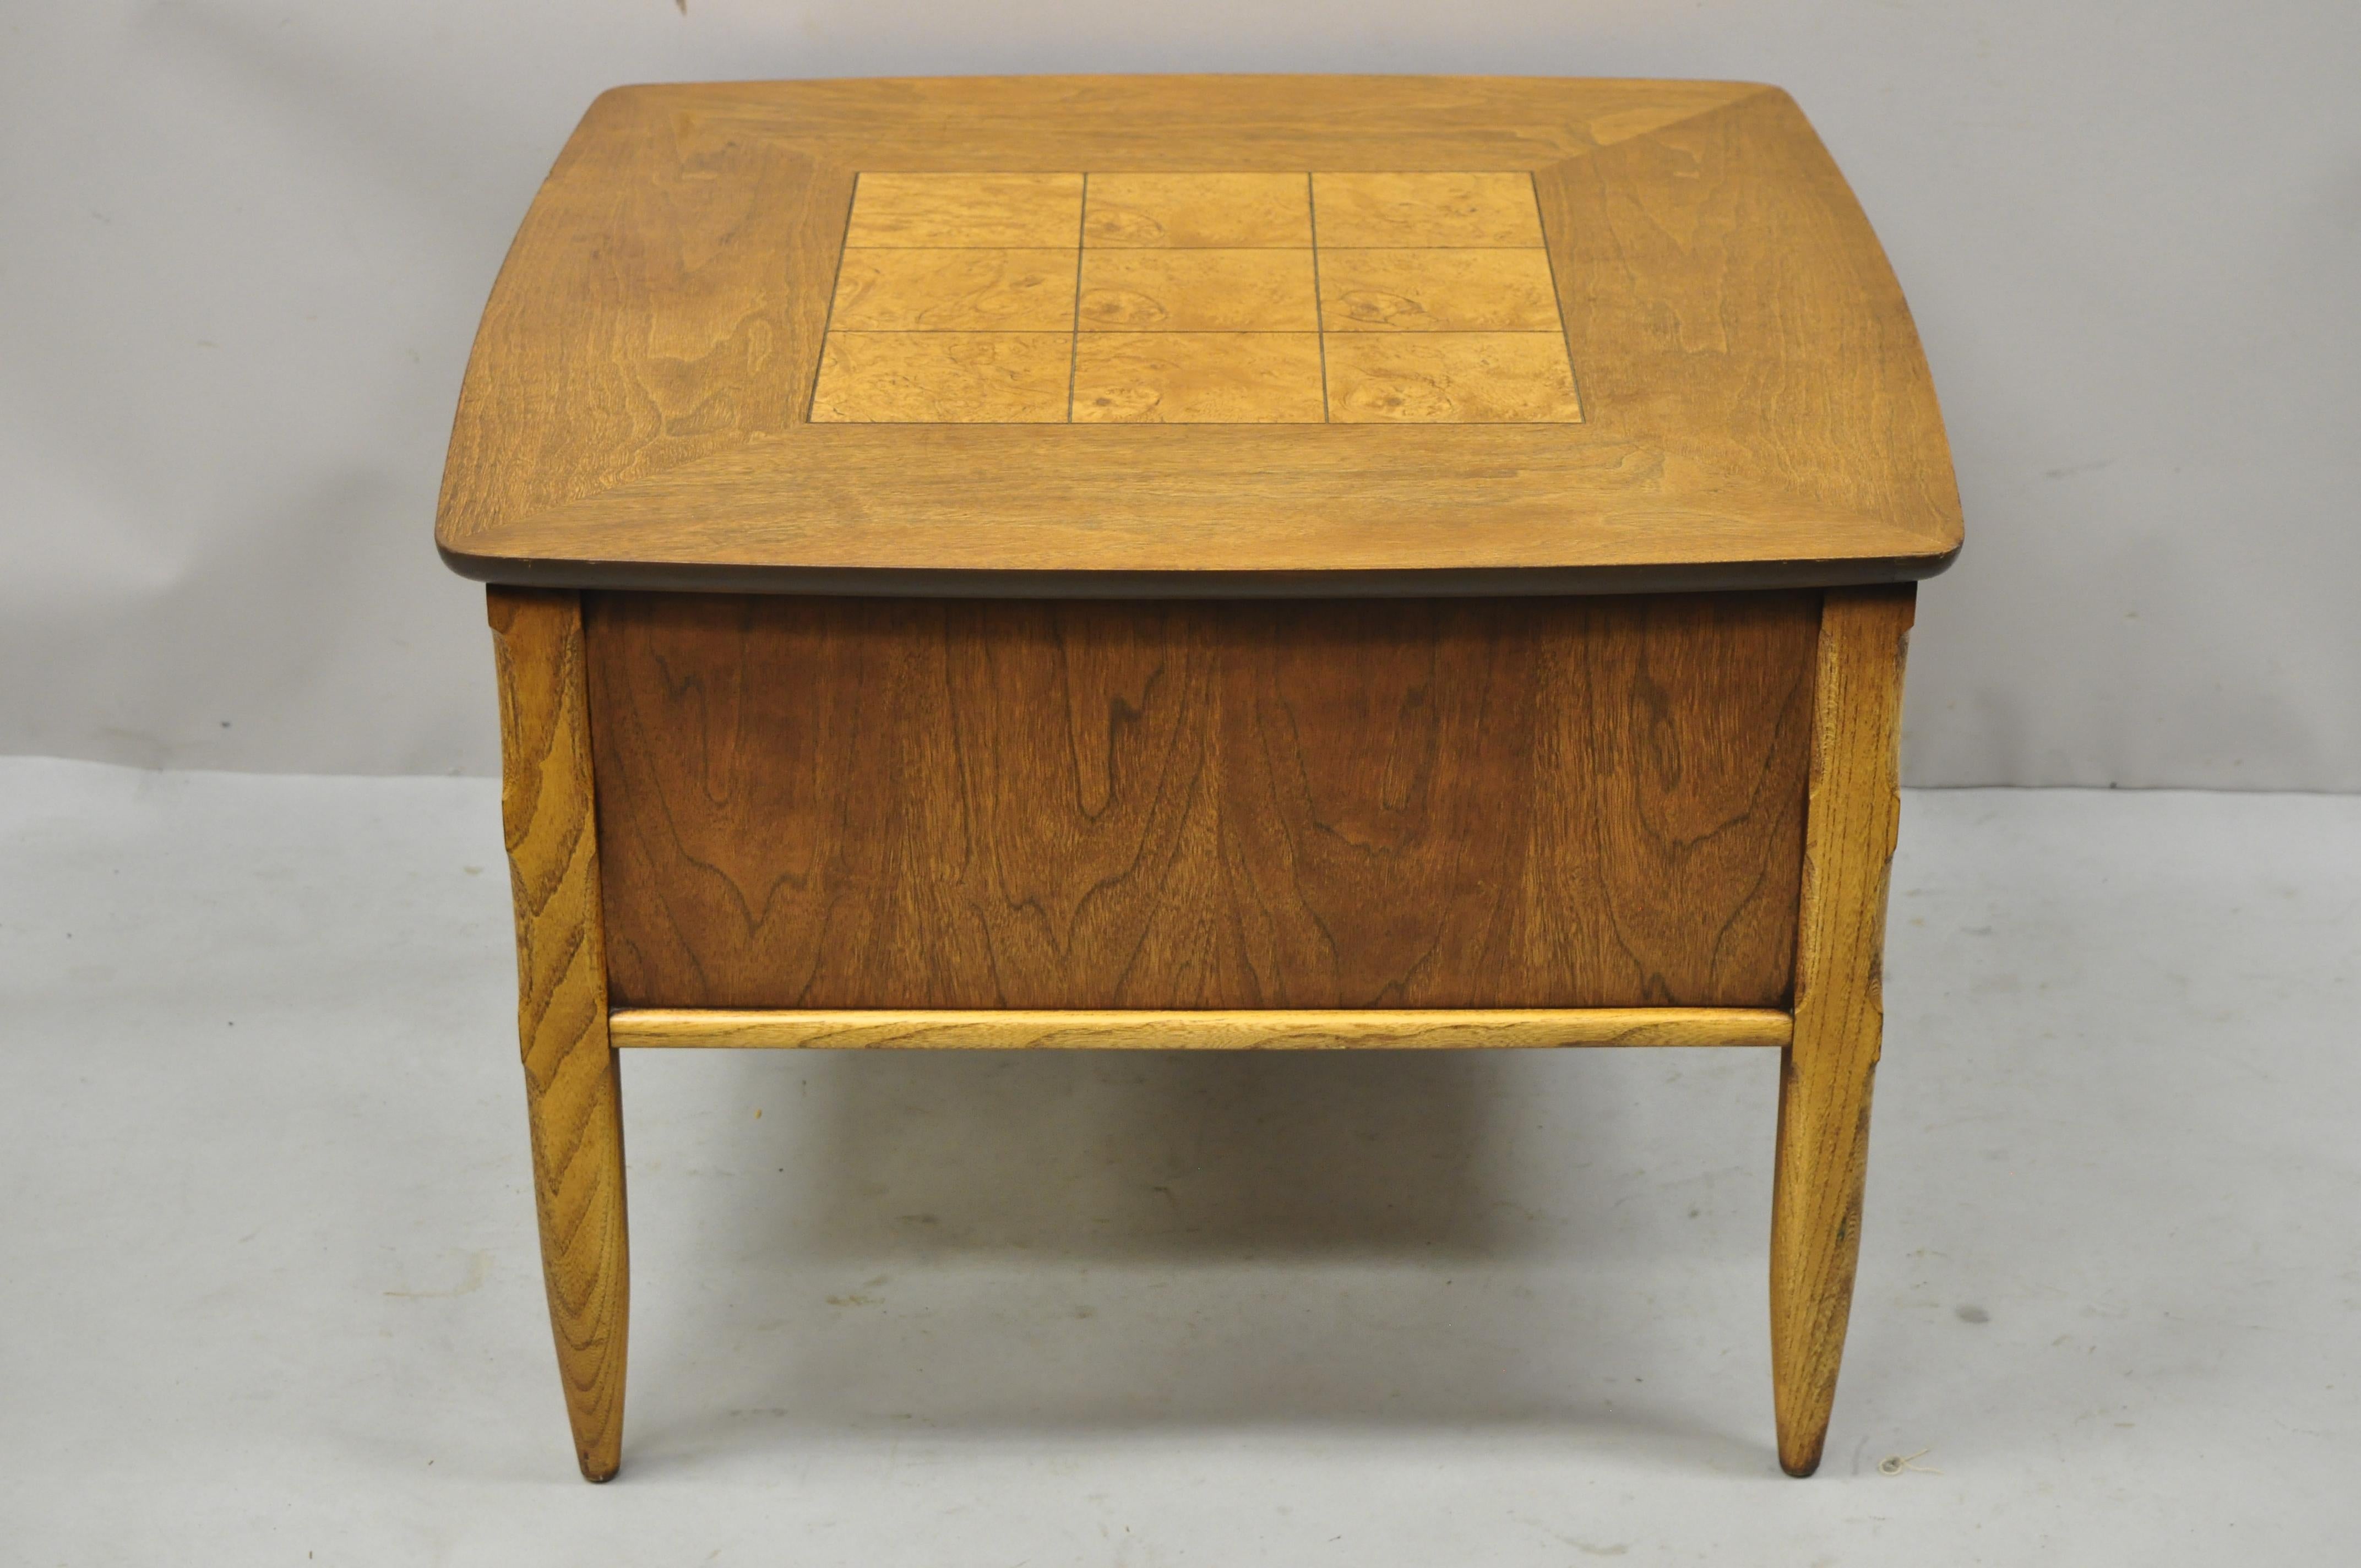 Lane Mid-Century Modern Walnut 2 Drawer Lamp End Table with Burlwood Inlay Top For Sale 6